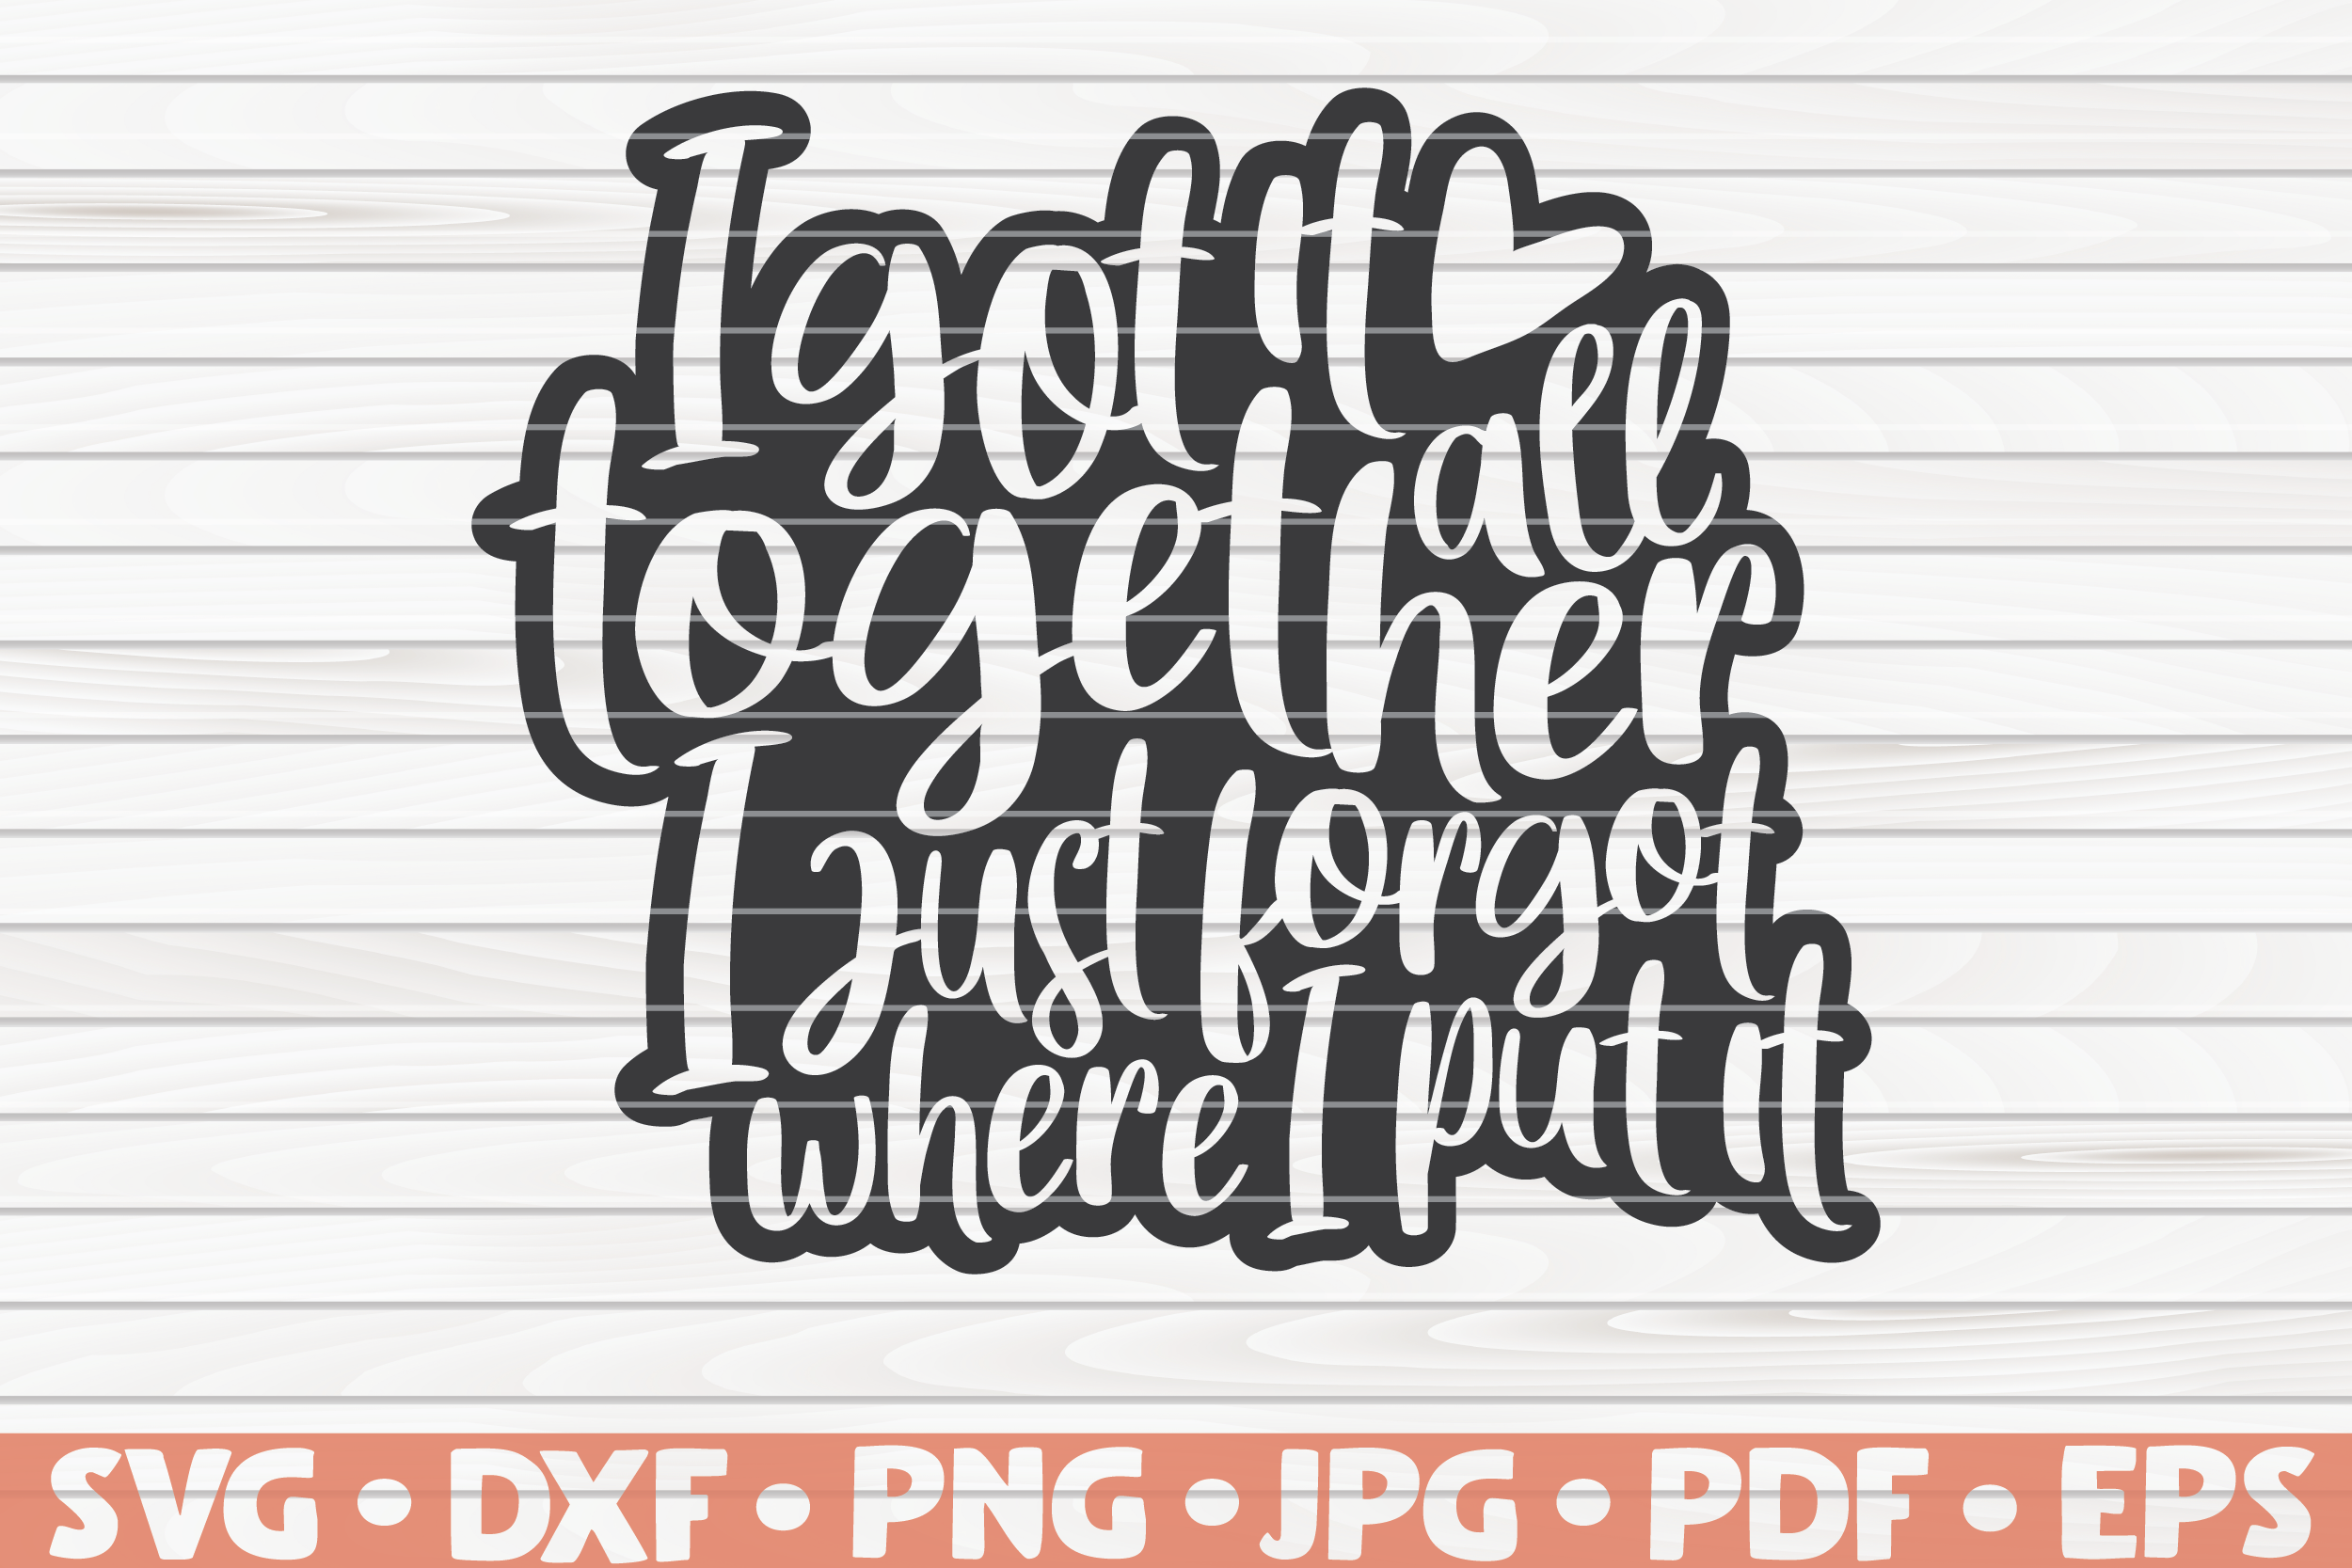 Download I Got It All Together Svg Mother S Day Funny Sayings By Hqdigitalart Thehungryjpeg Com